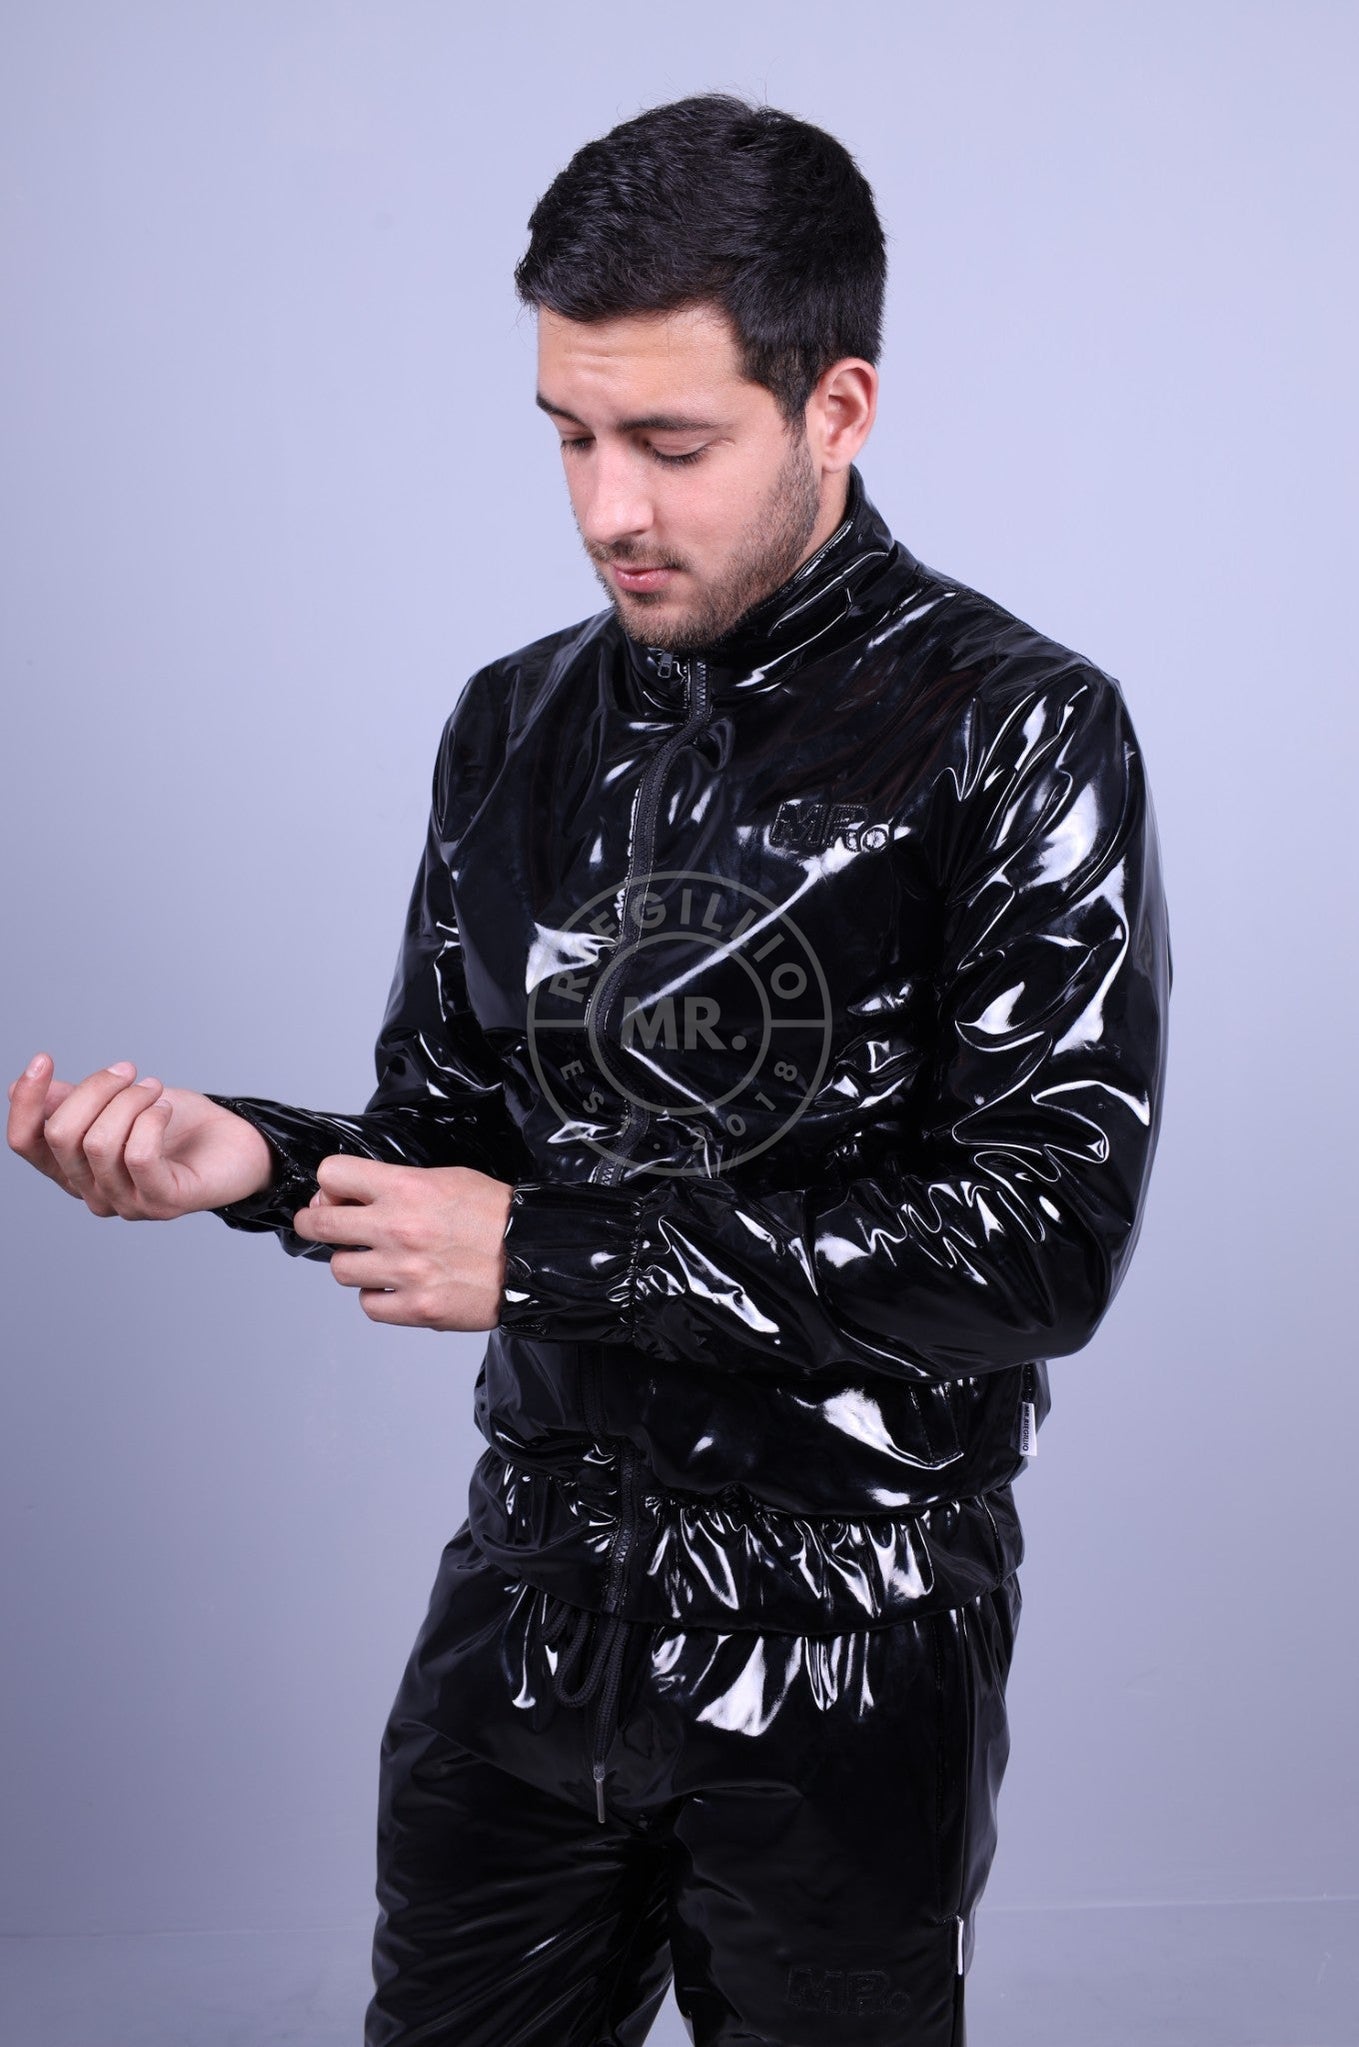 MR. ECO PVC In&Out Tracksuit Jacket-at MR. Riegillio